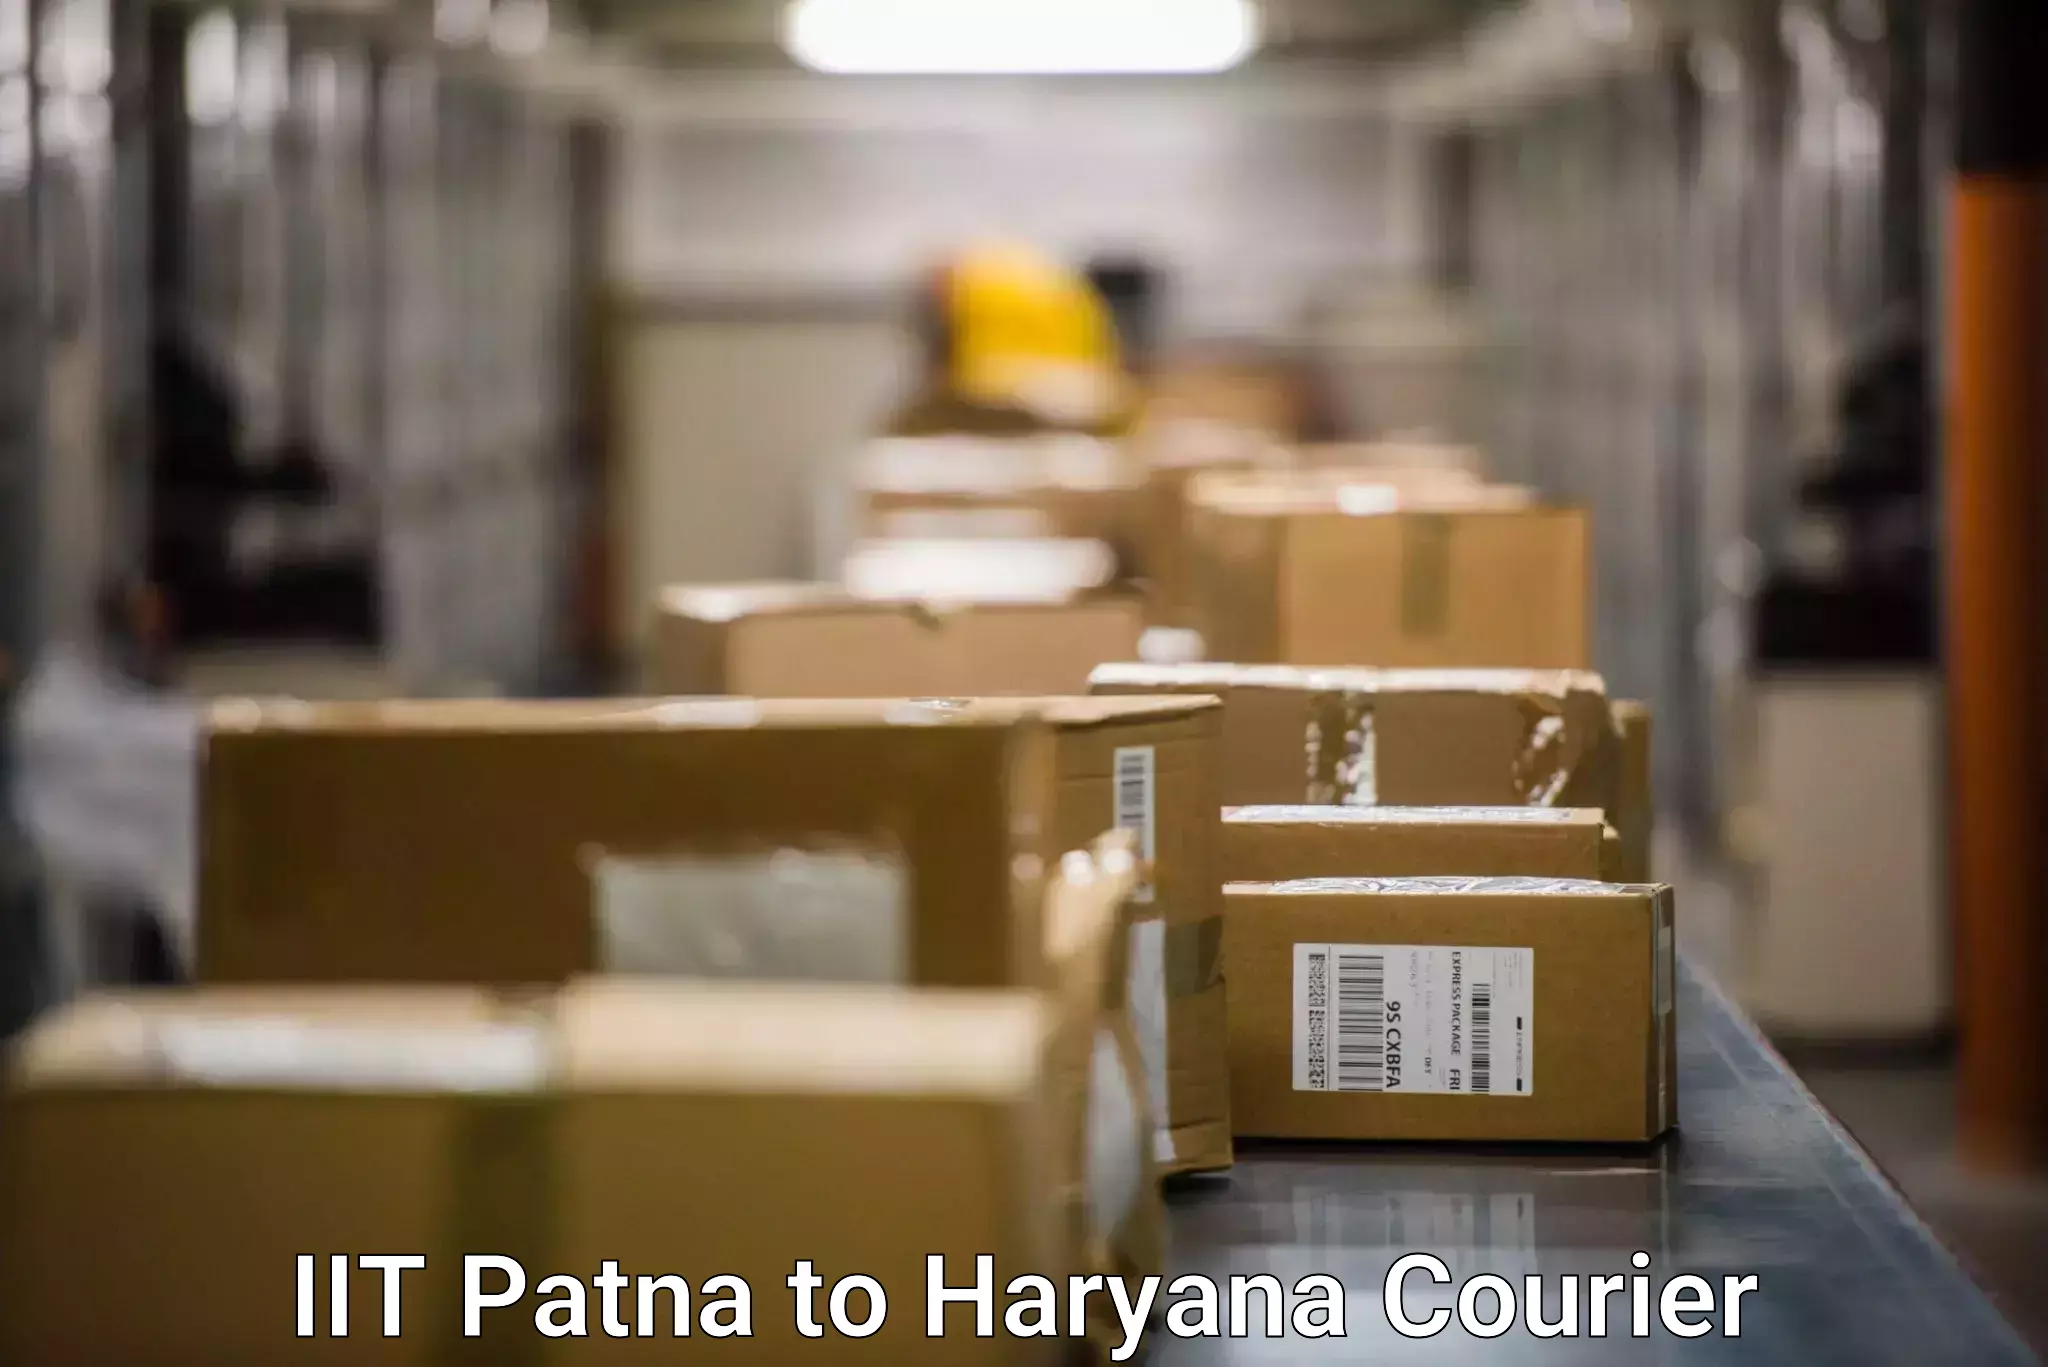 24/7 courier service IIT Patna to Fatehabad